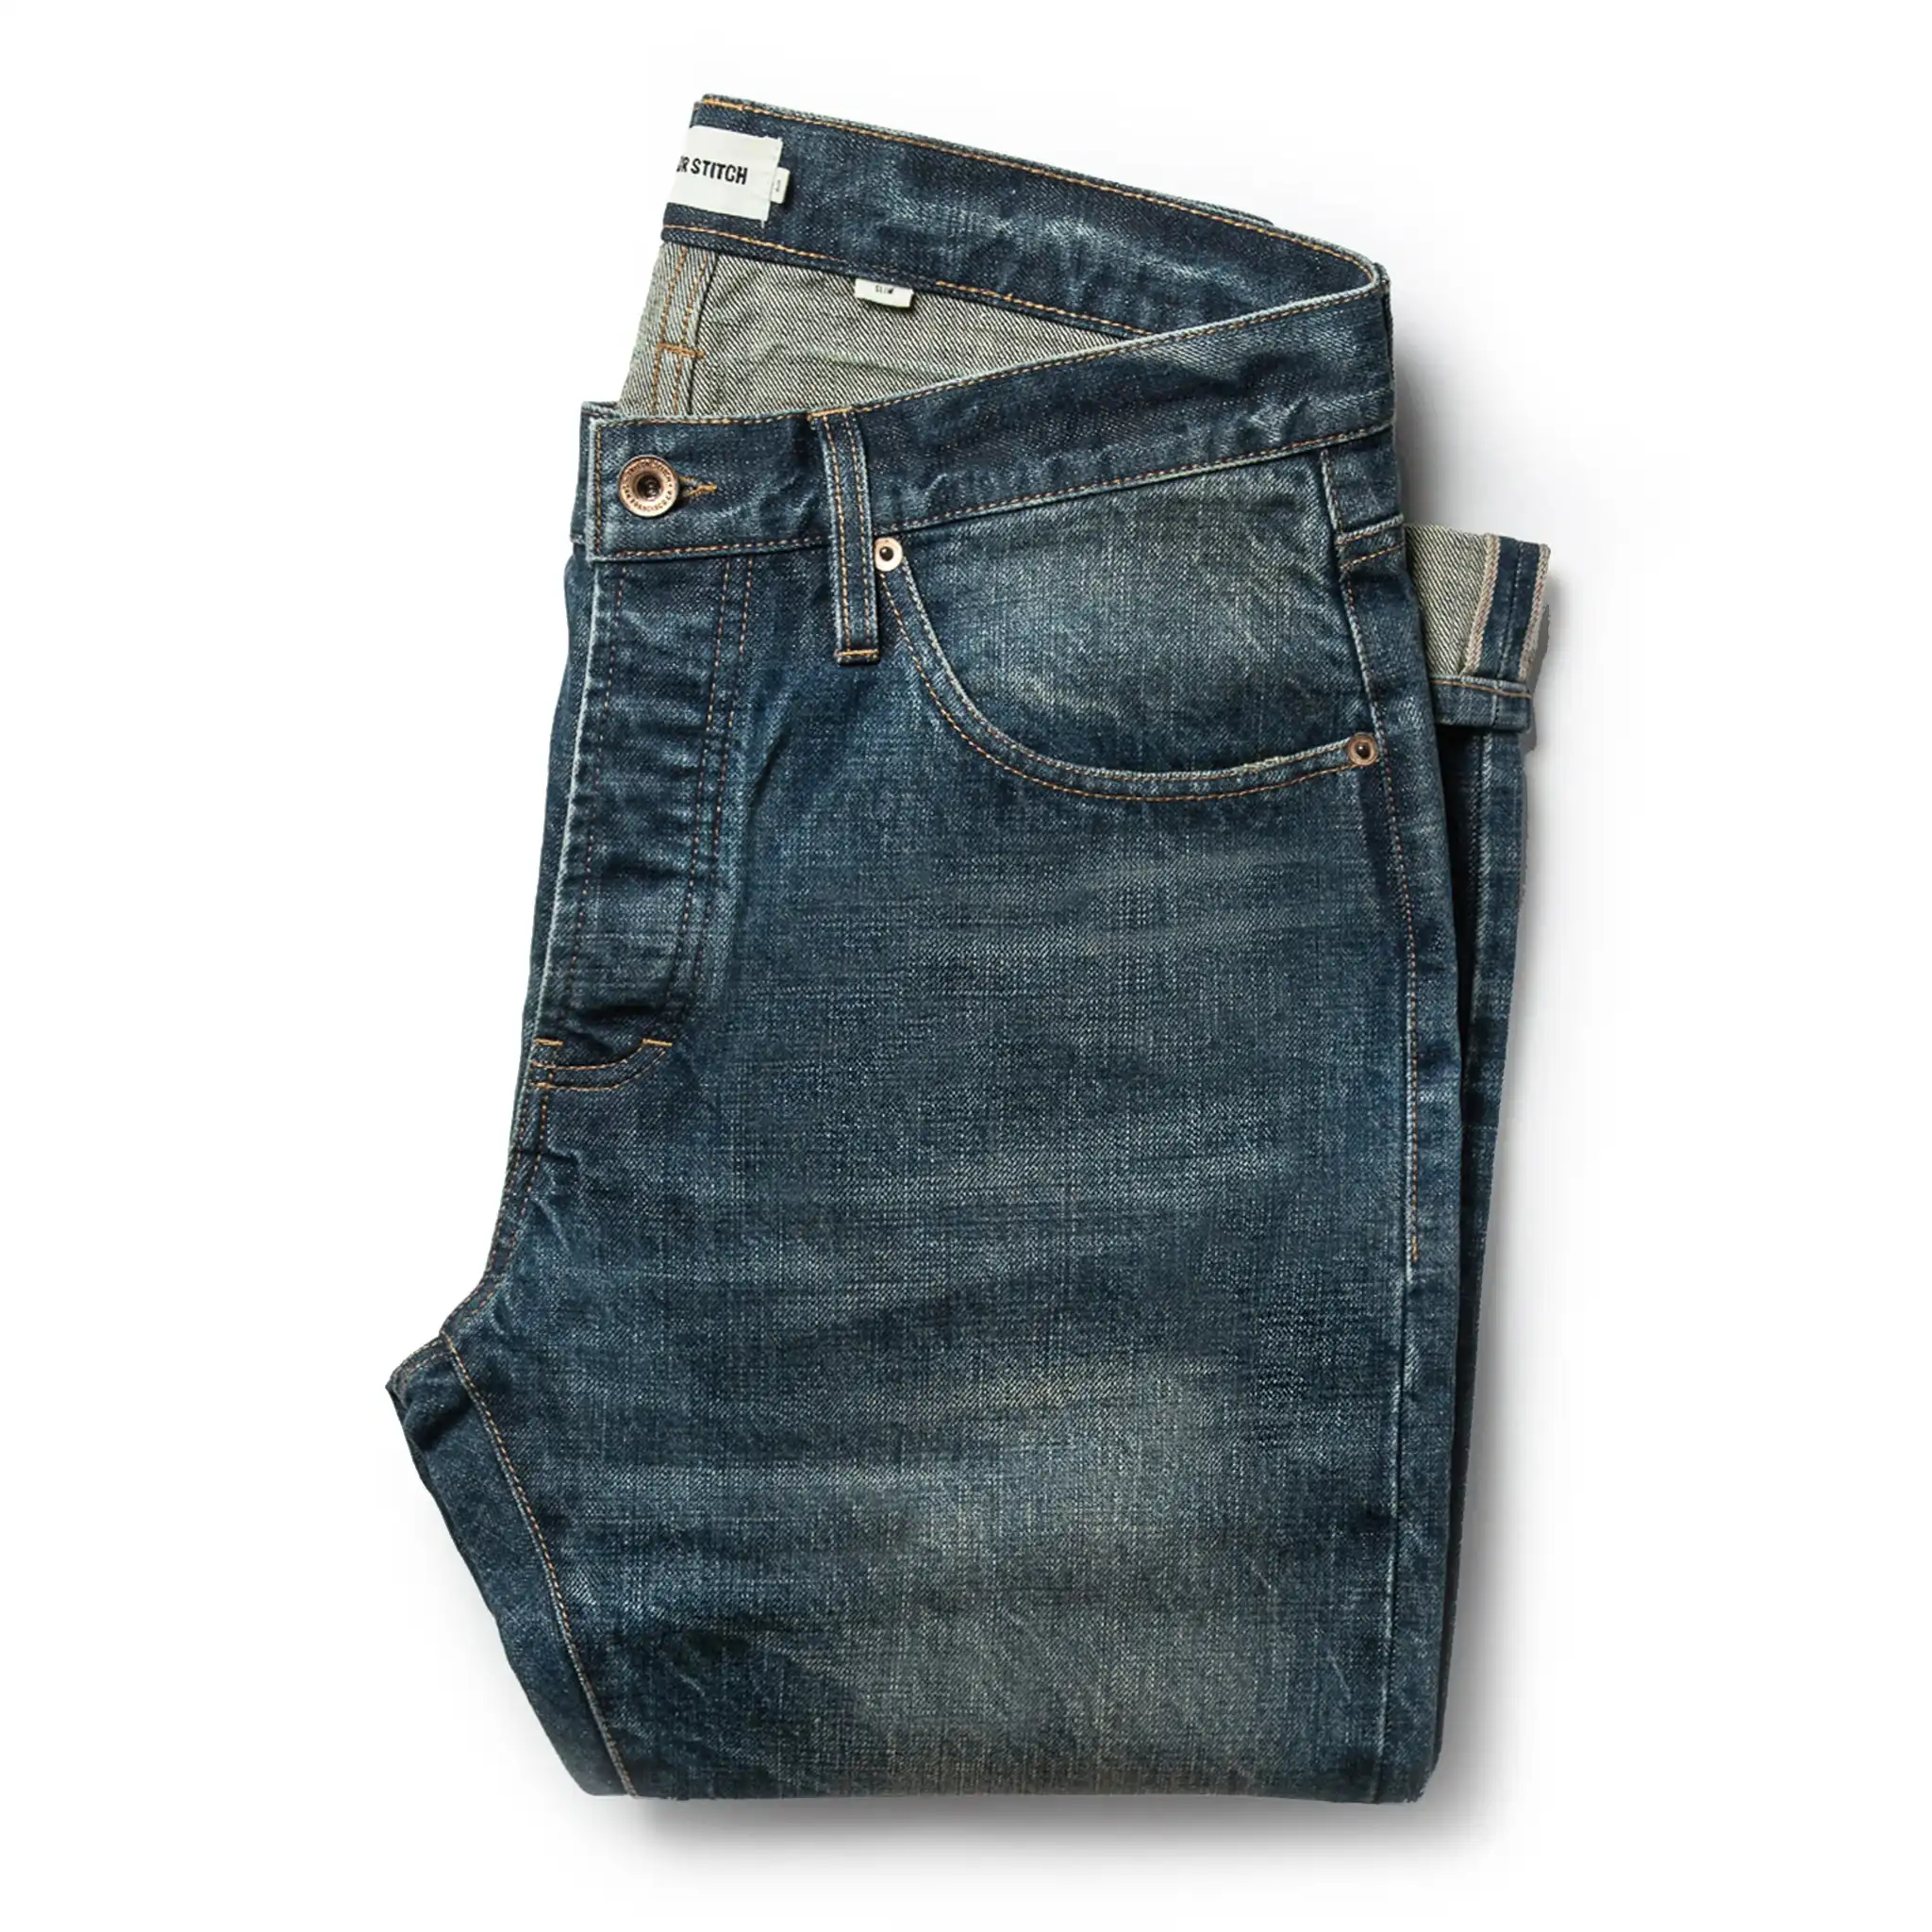 Taylor Stitch Slim Jeans in Organic Selvage